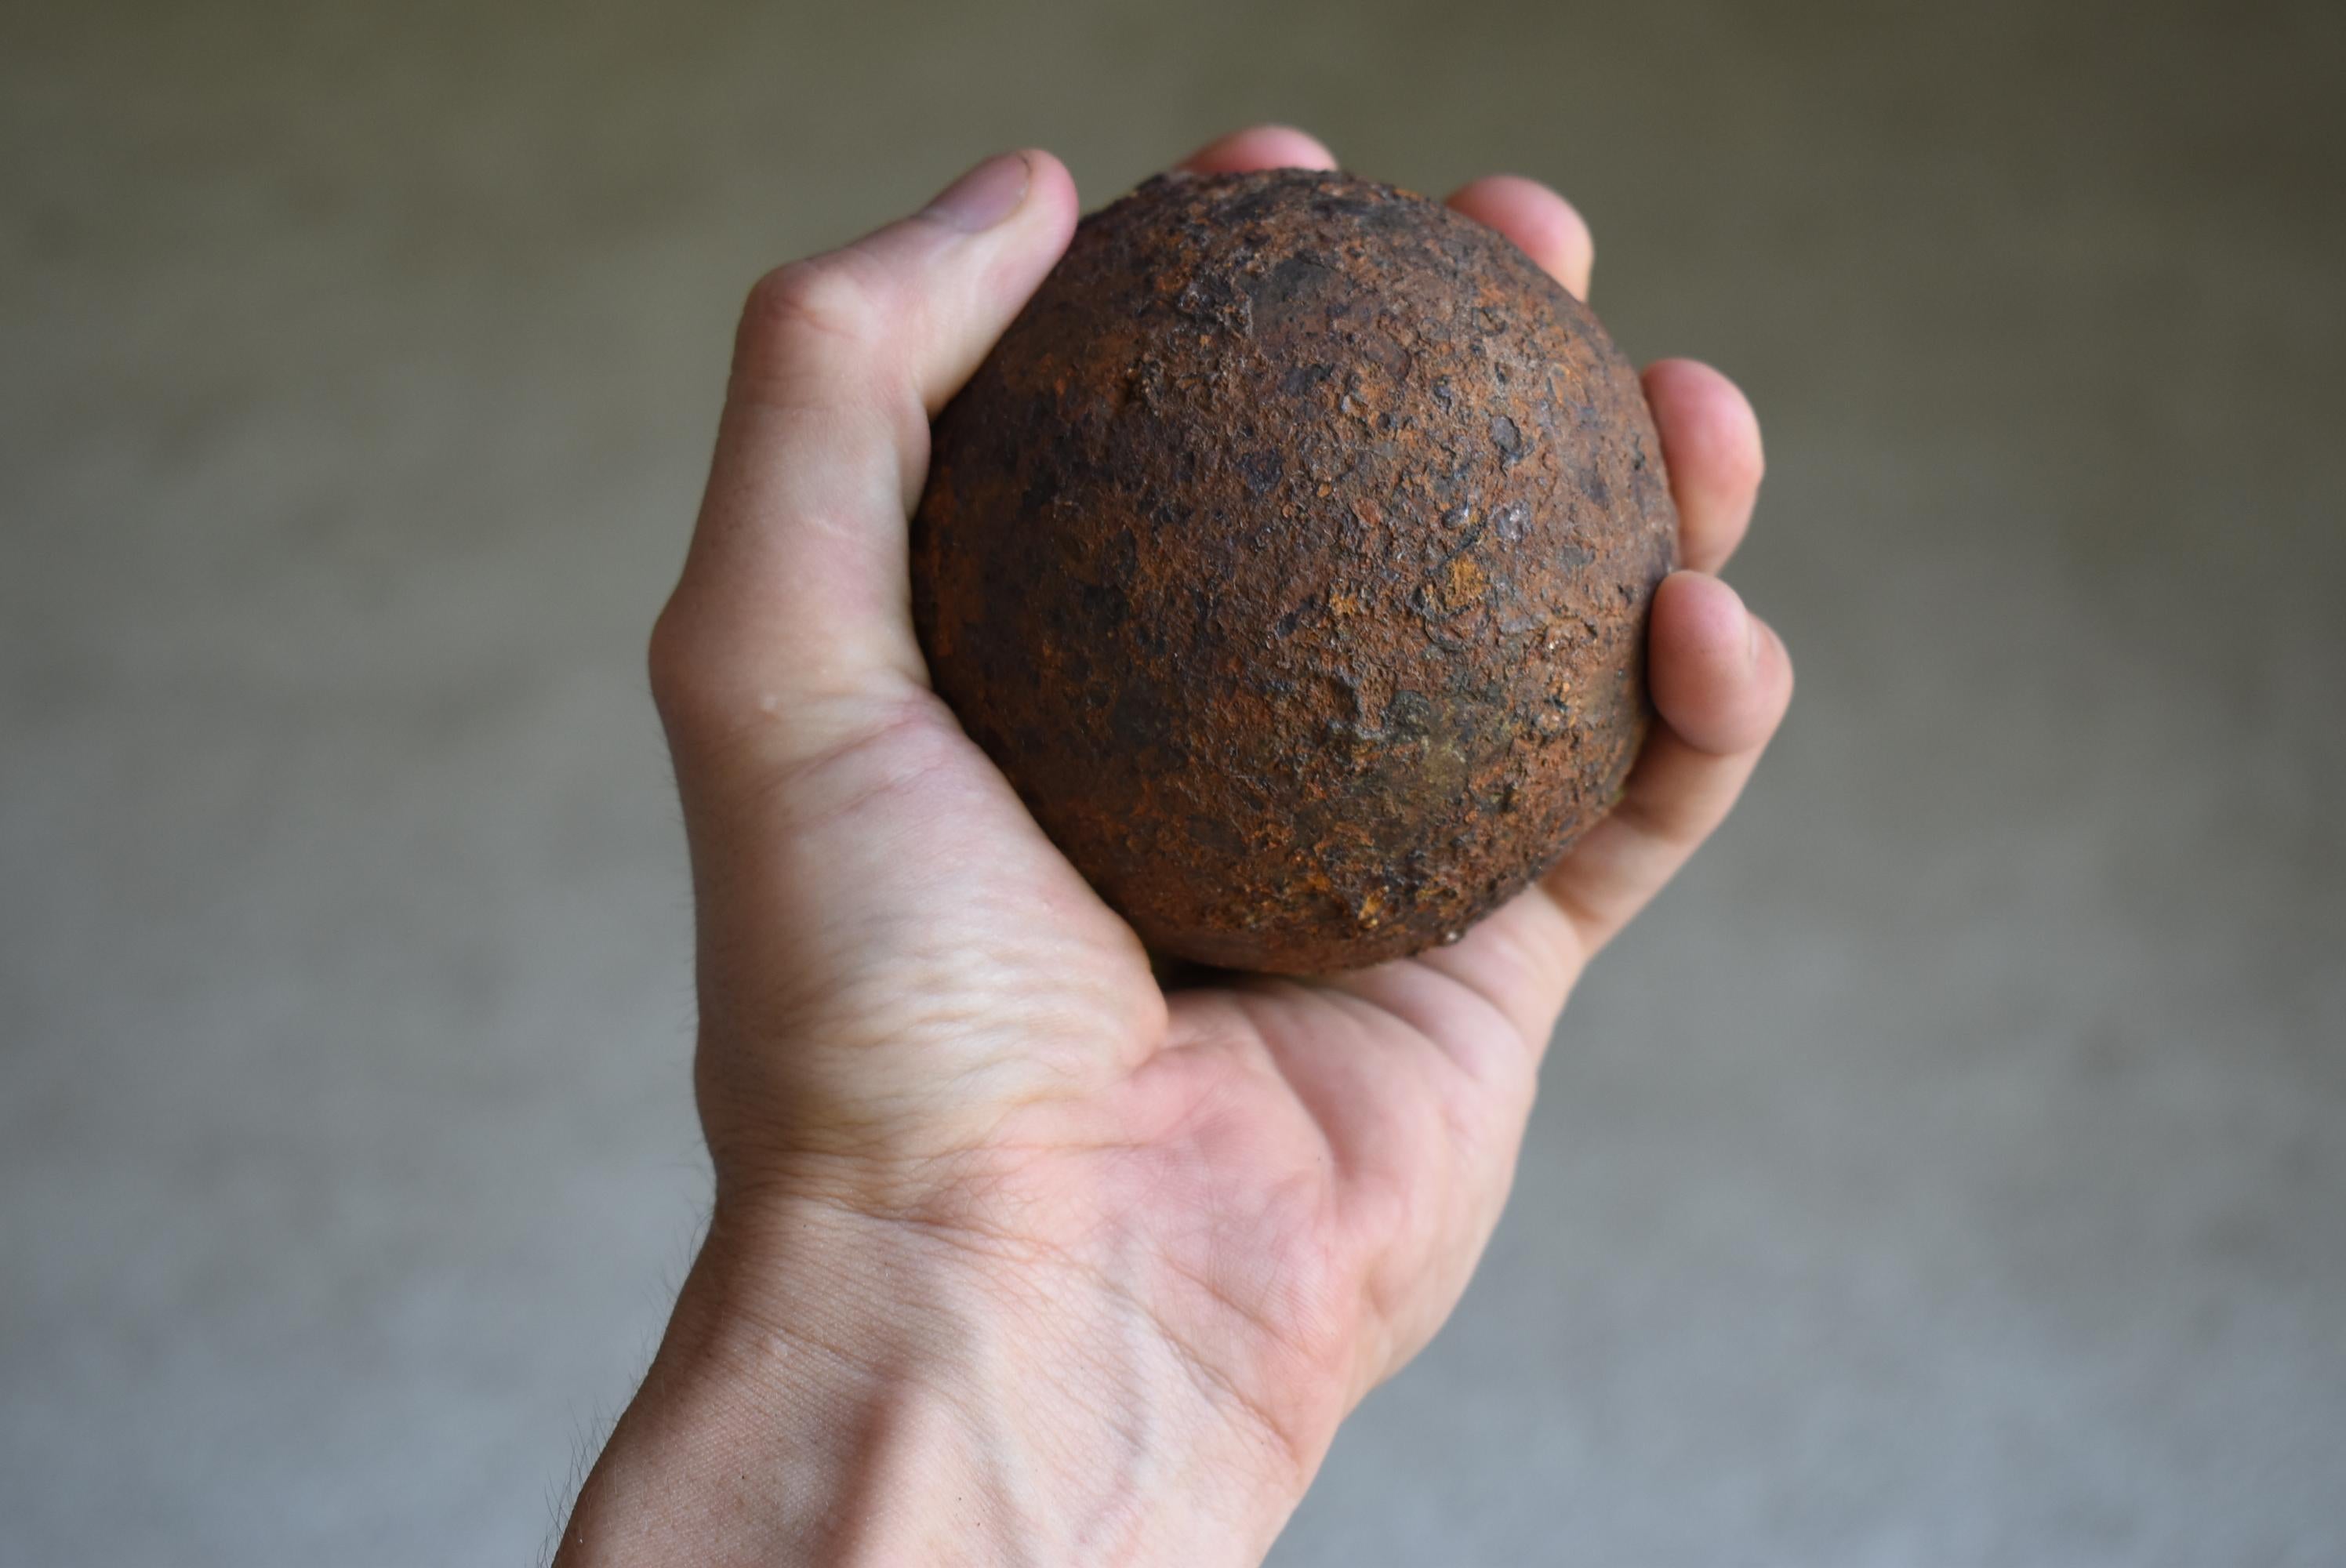 It is an old Japanese rusty ball of iron.
It seems to have been an artillery shell from the war era.

I assume it is a pre-war (1900s-1940s) artillery shell.
Very rare item.

The texture of rusted iron is beautiful.

Please enjoy the world